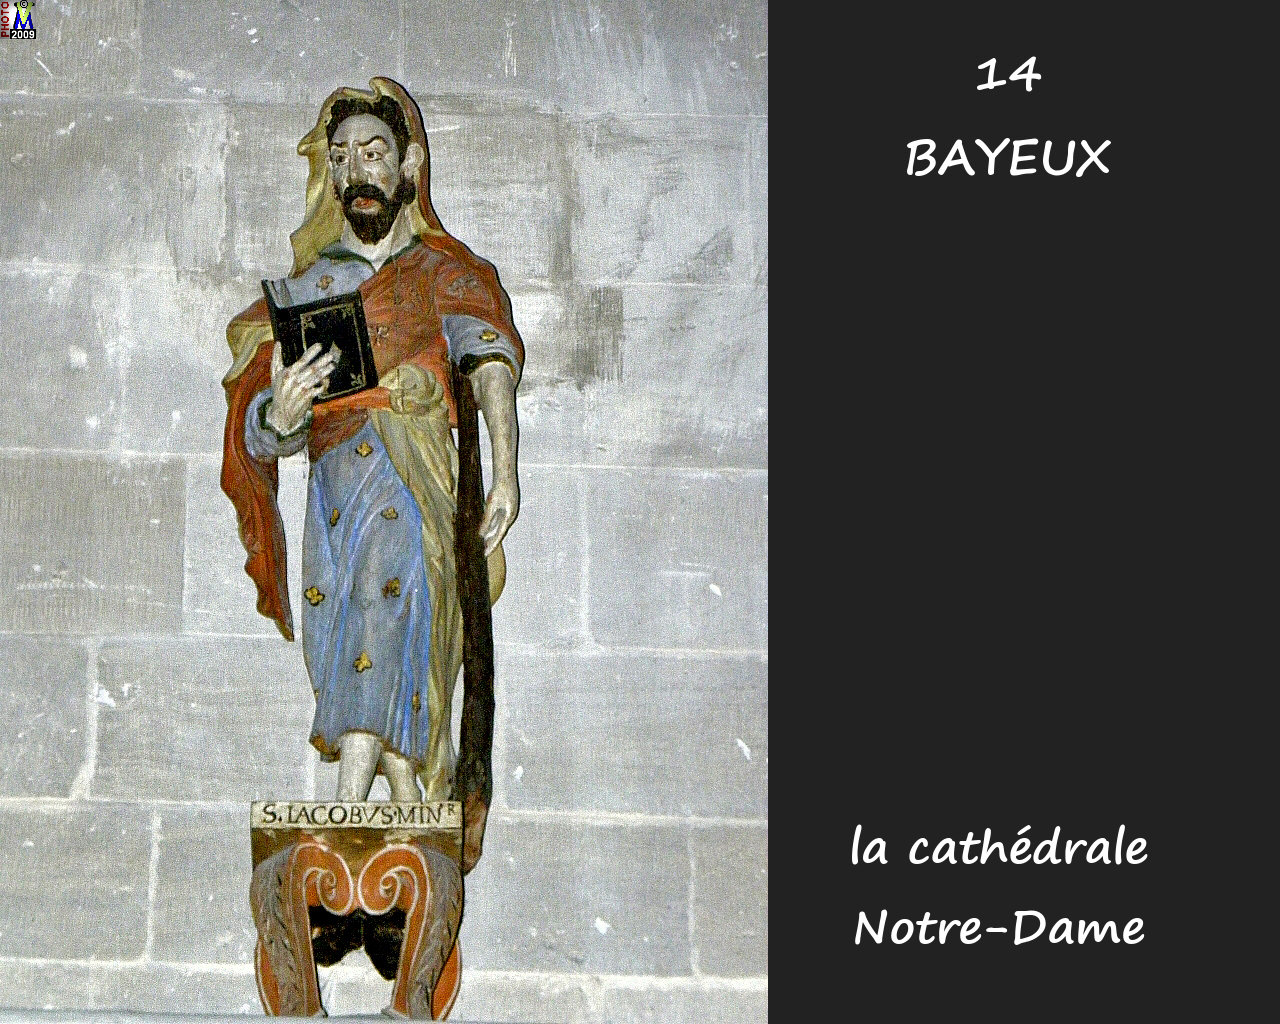 14BAYEUX_cathedrale_252.jpg